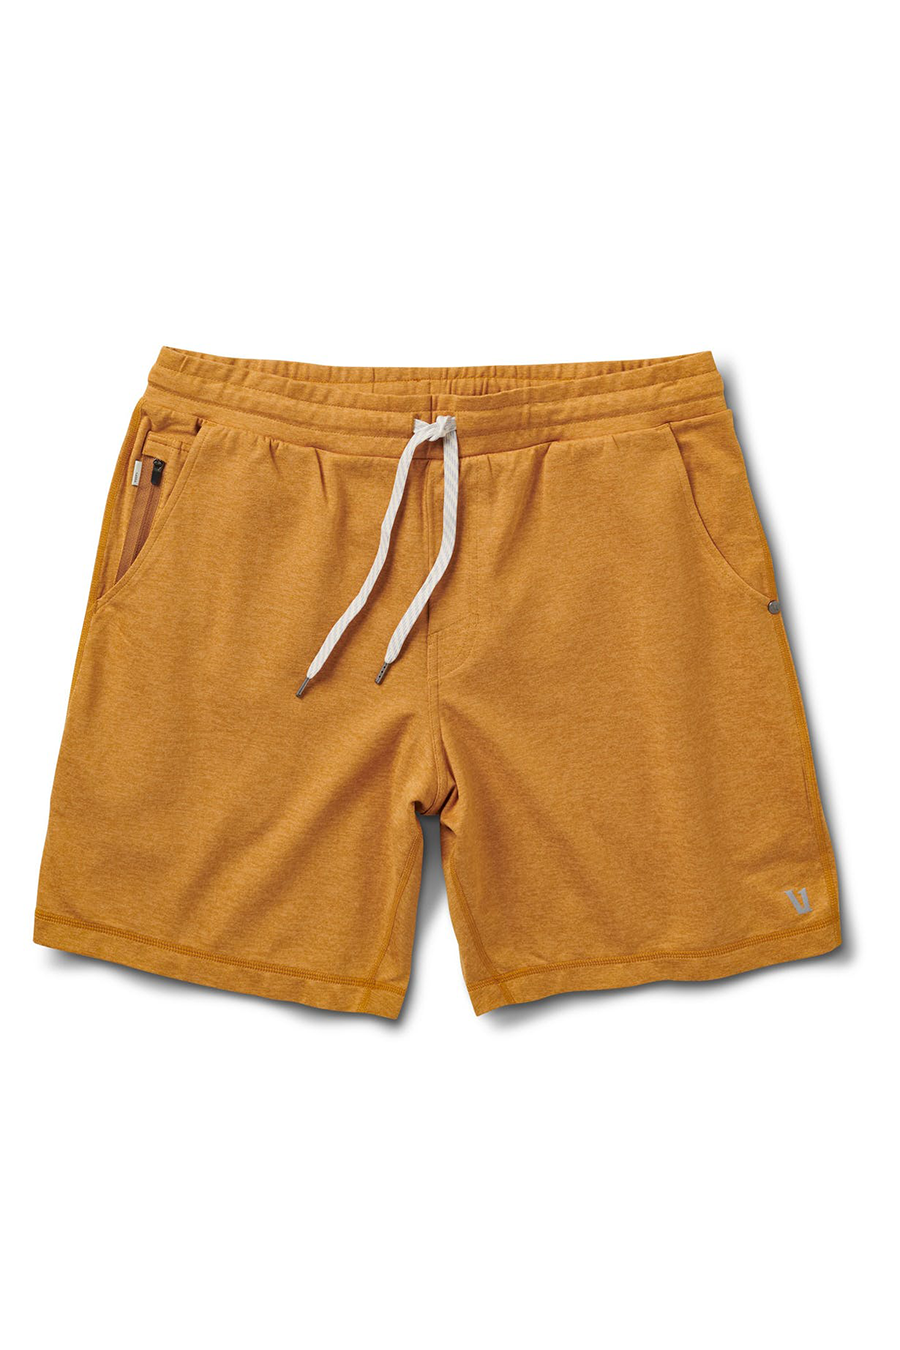 Ponto Short | Flax Heather - Main Image Number 1 of 1